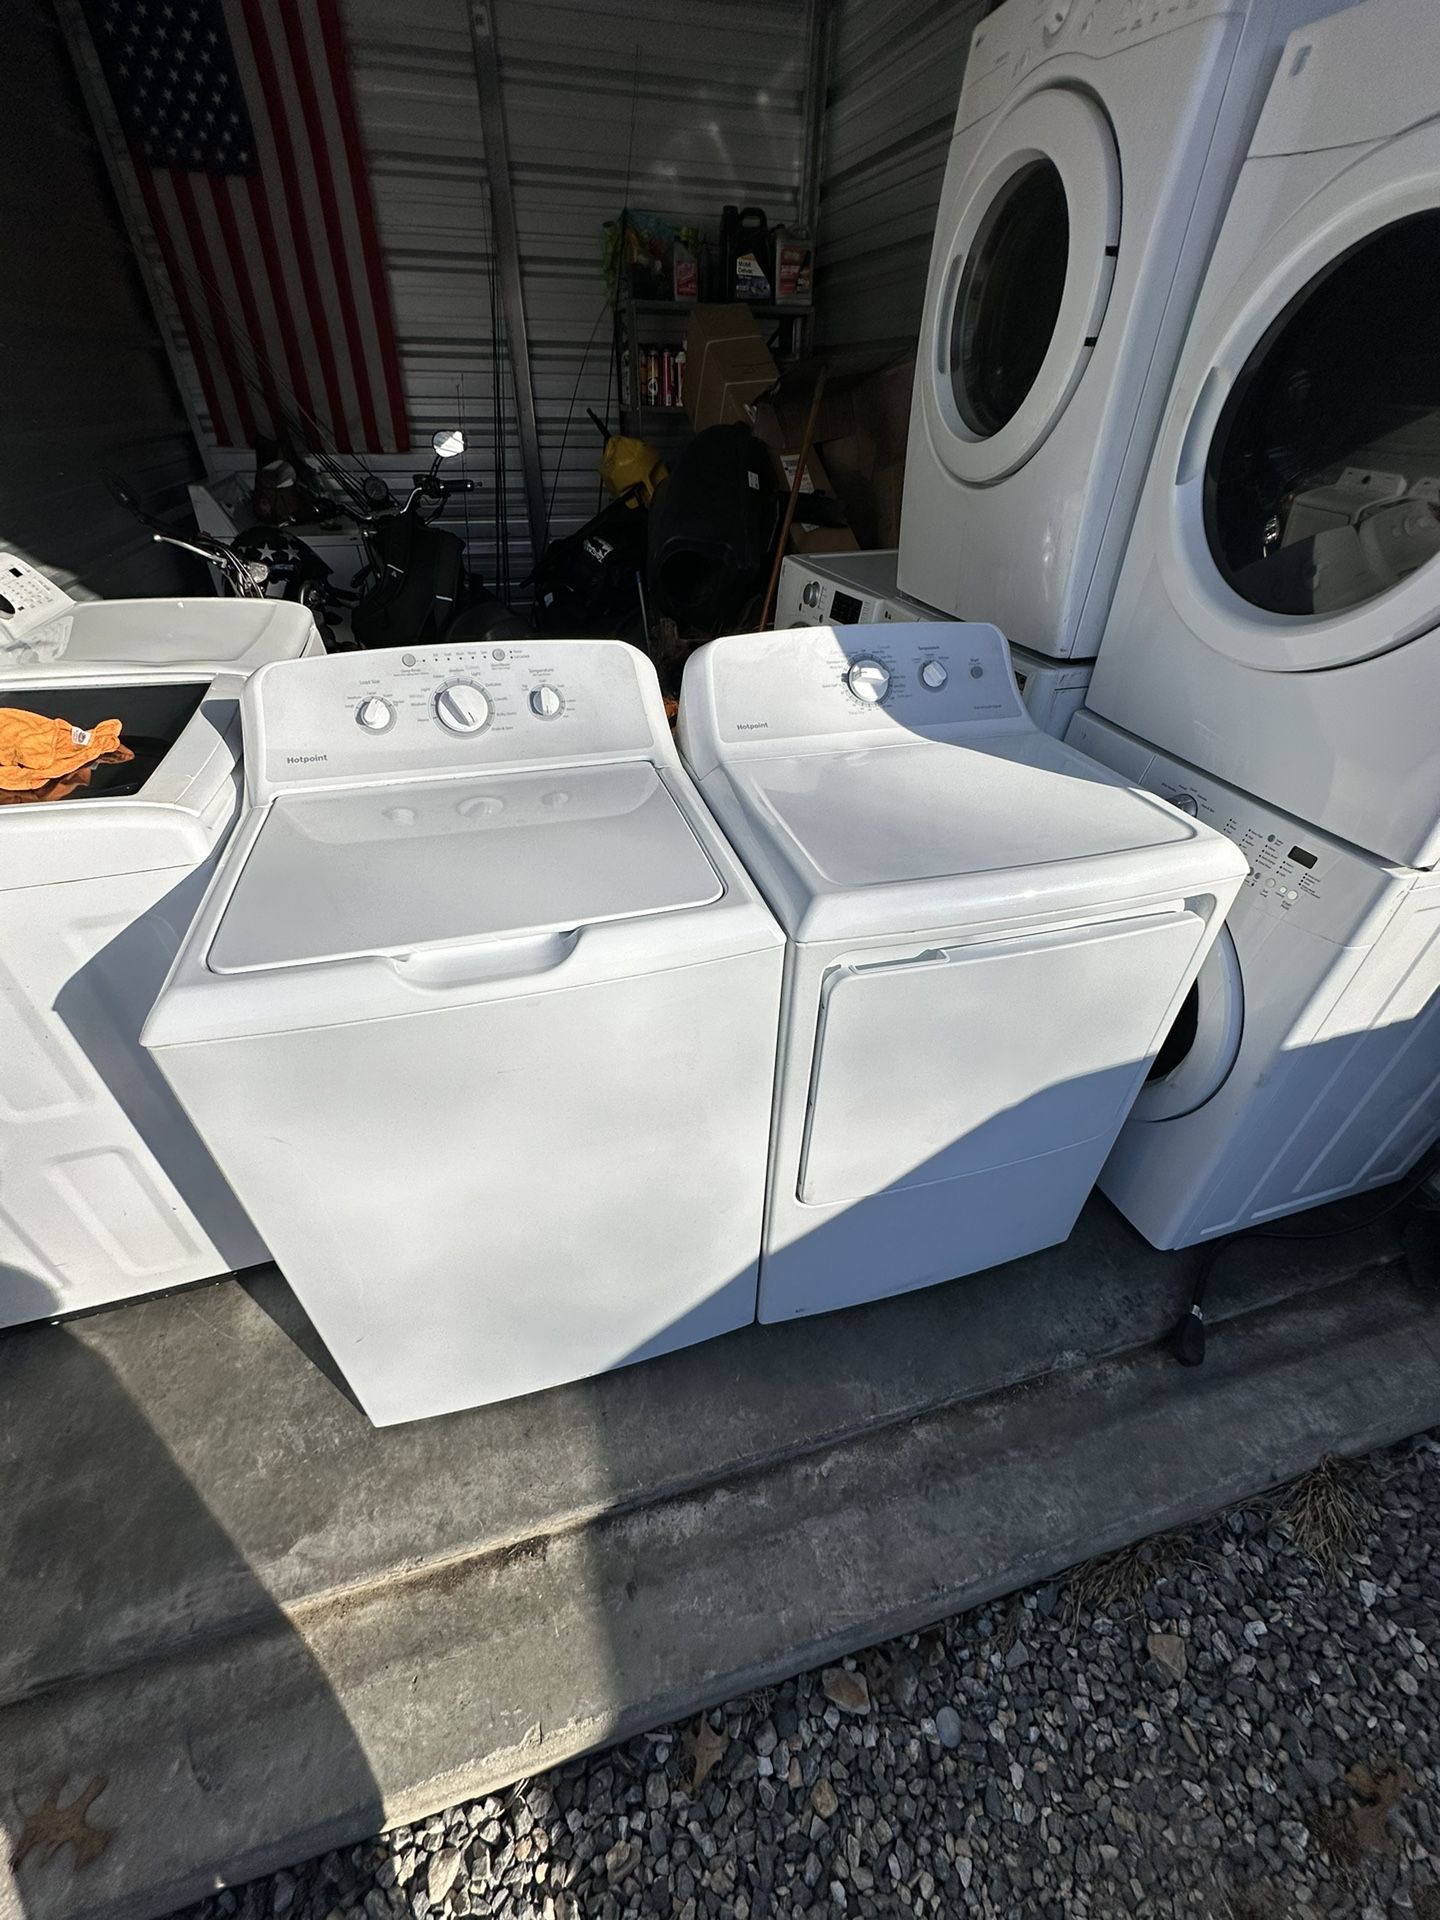 Hotpoint Washer And Dryer 